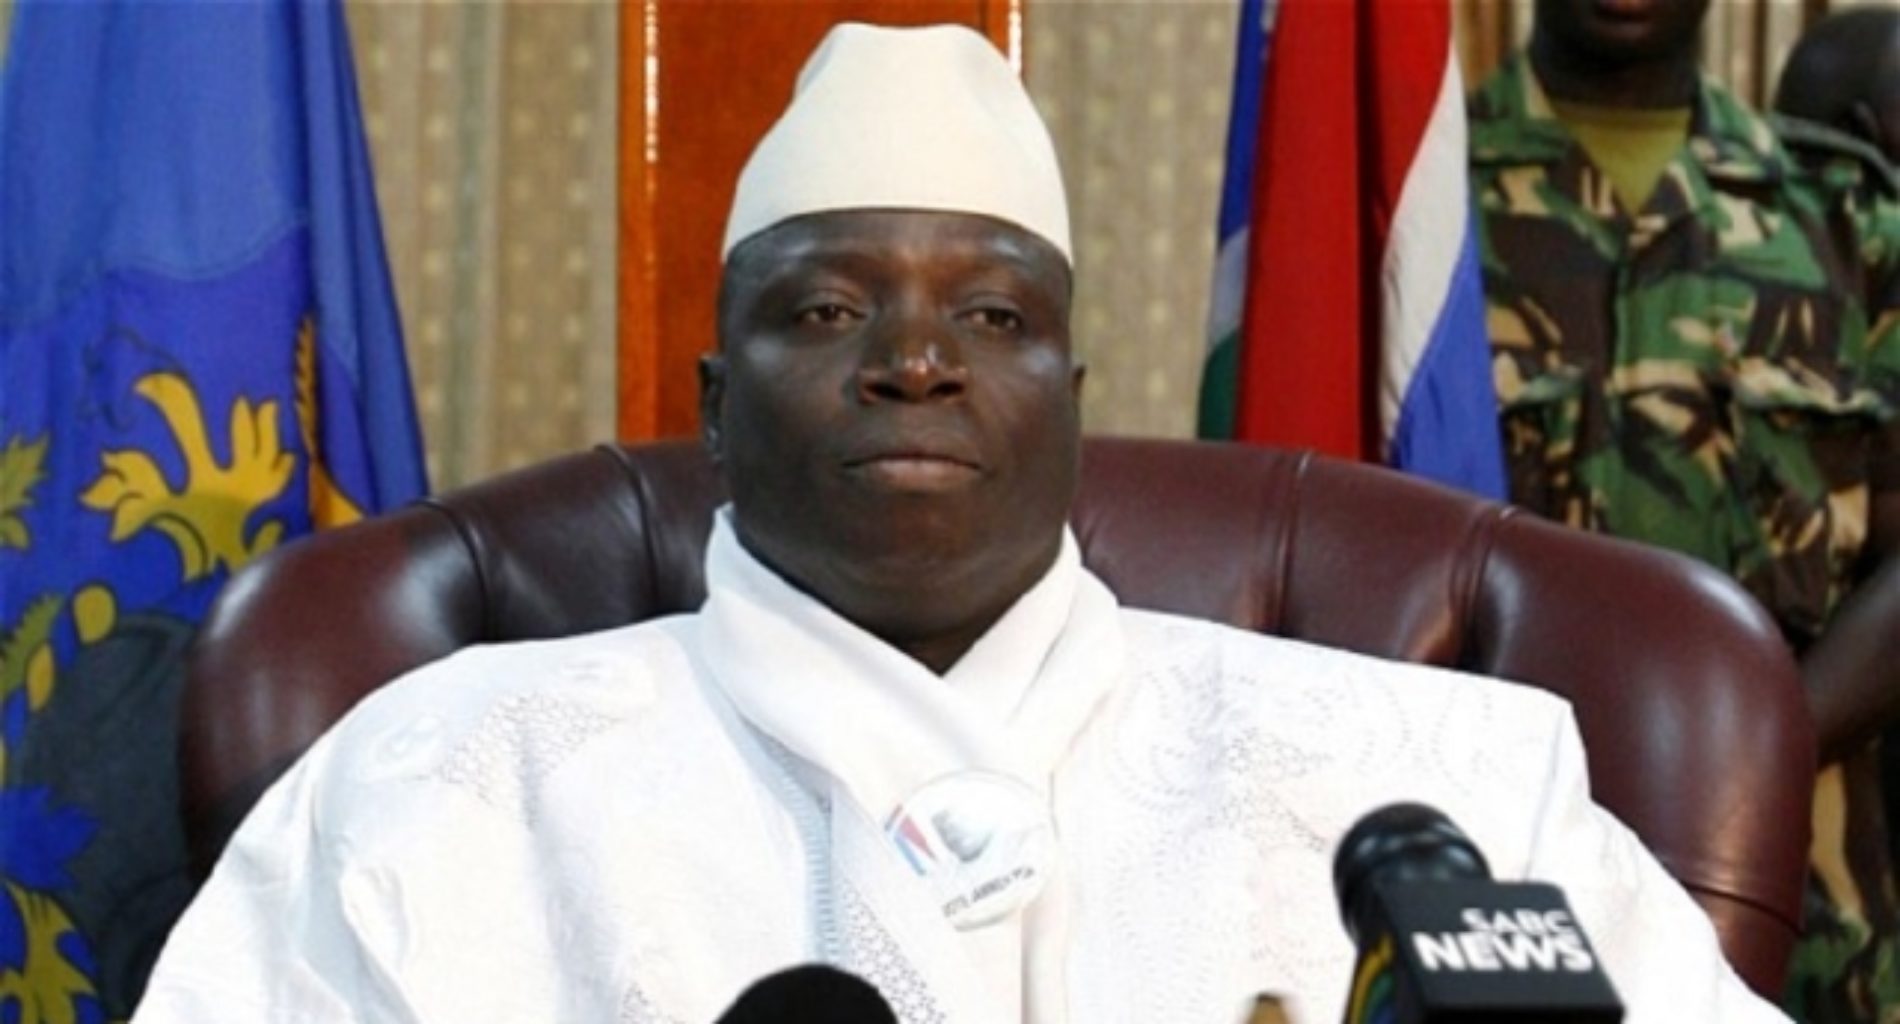 Gambian President claims he can cure AIDS